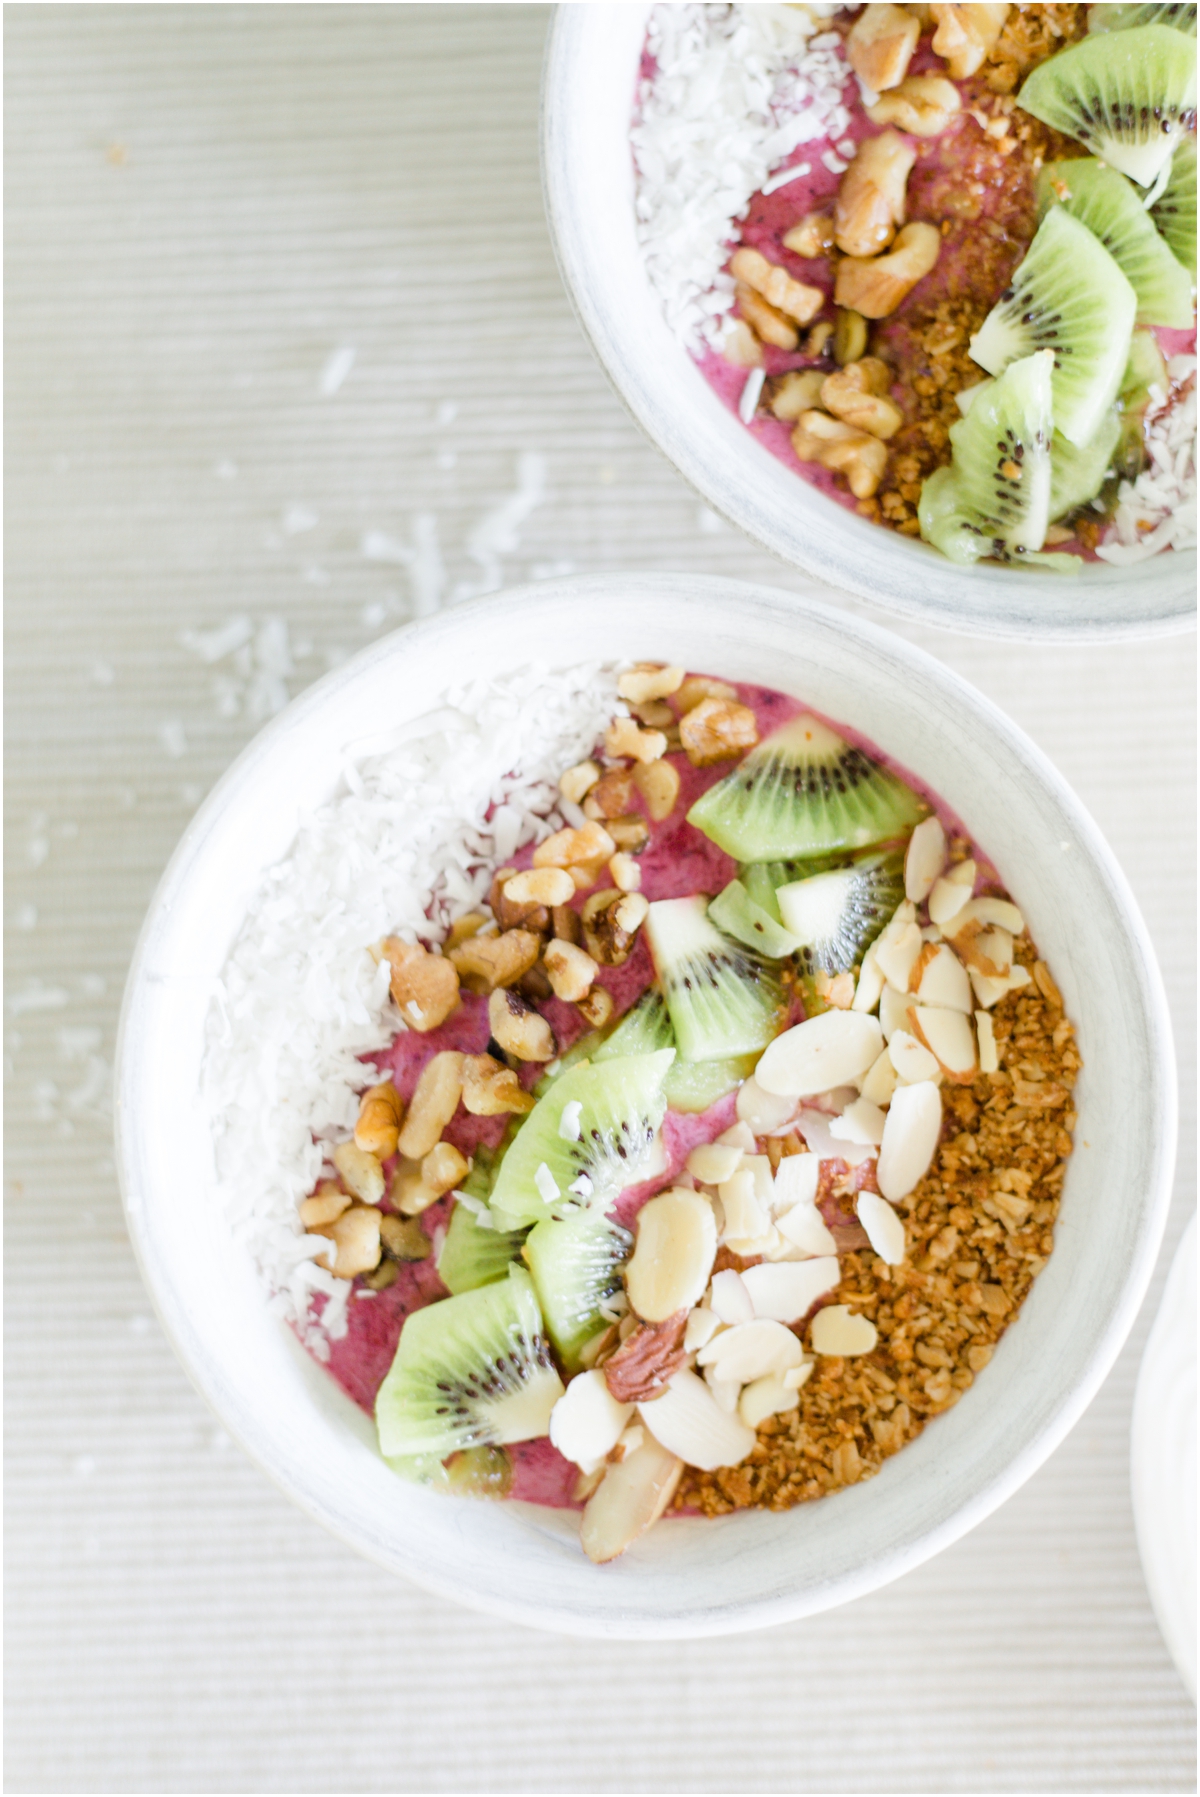 How to make smoothie bowls with fruit and toppings | Jacqueline & Laura